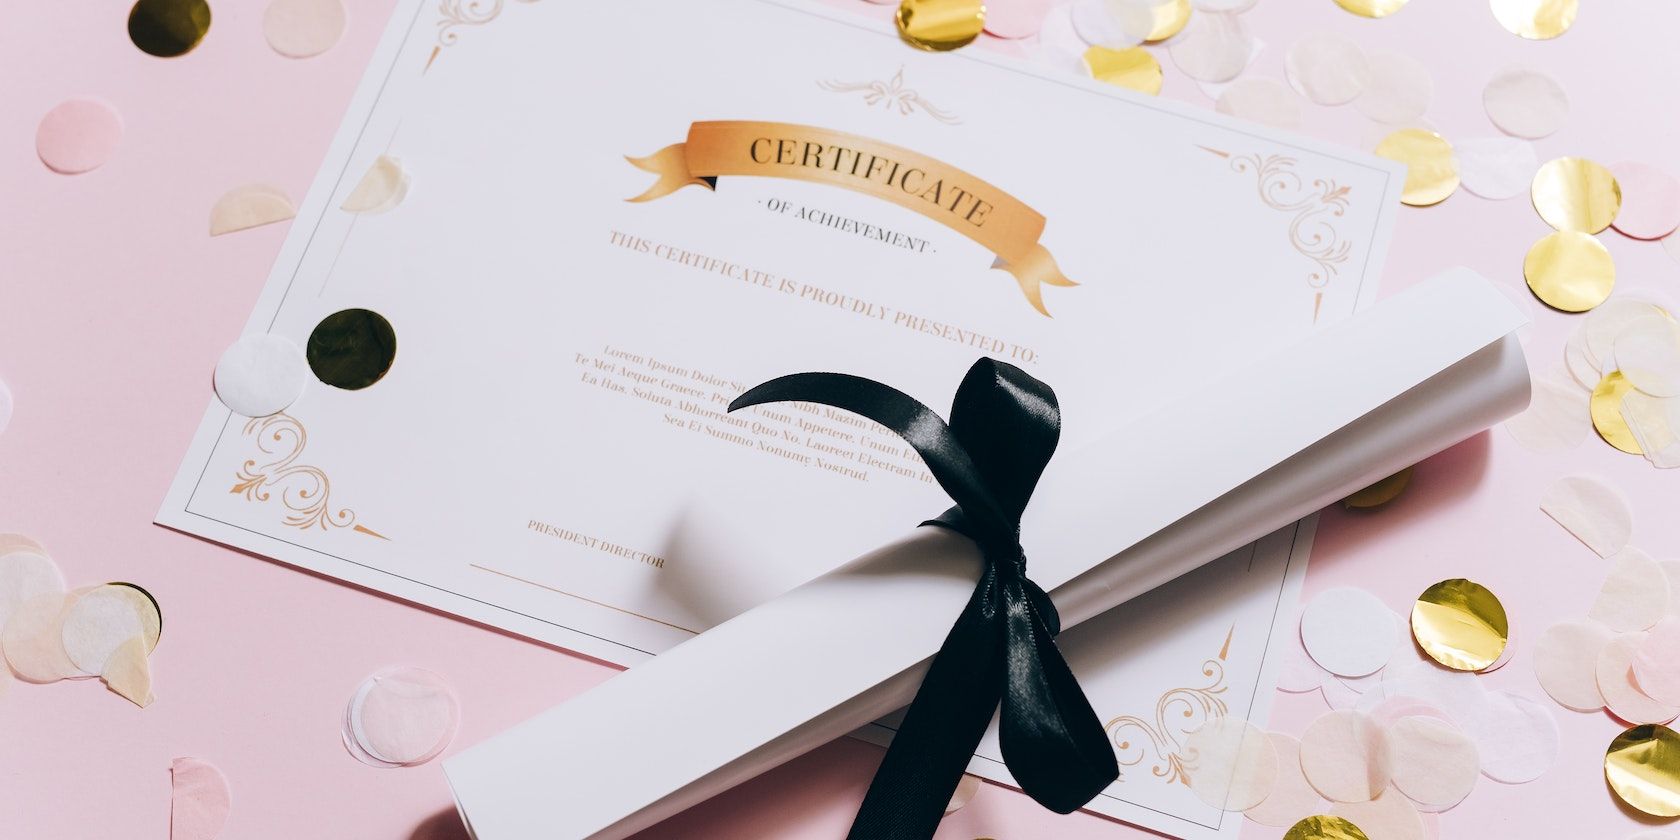 A rolled white paper and certificate on a pink surface